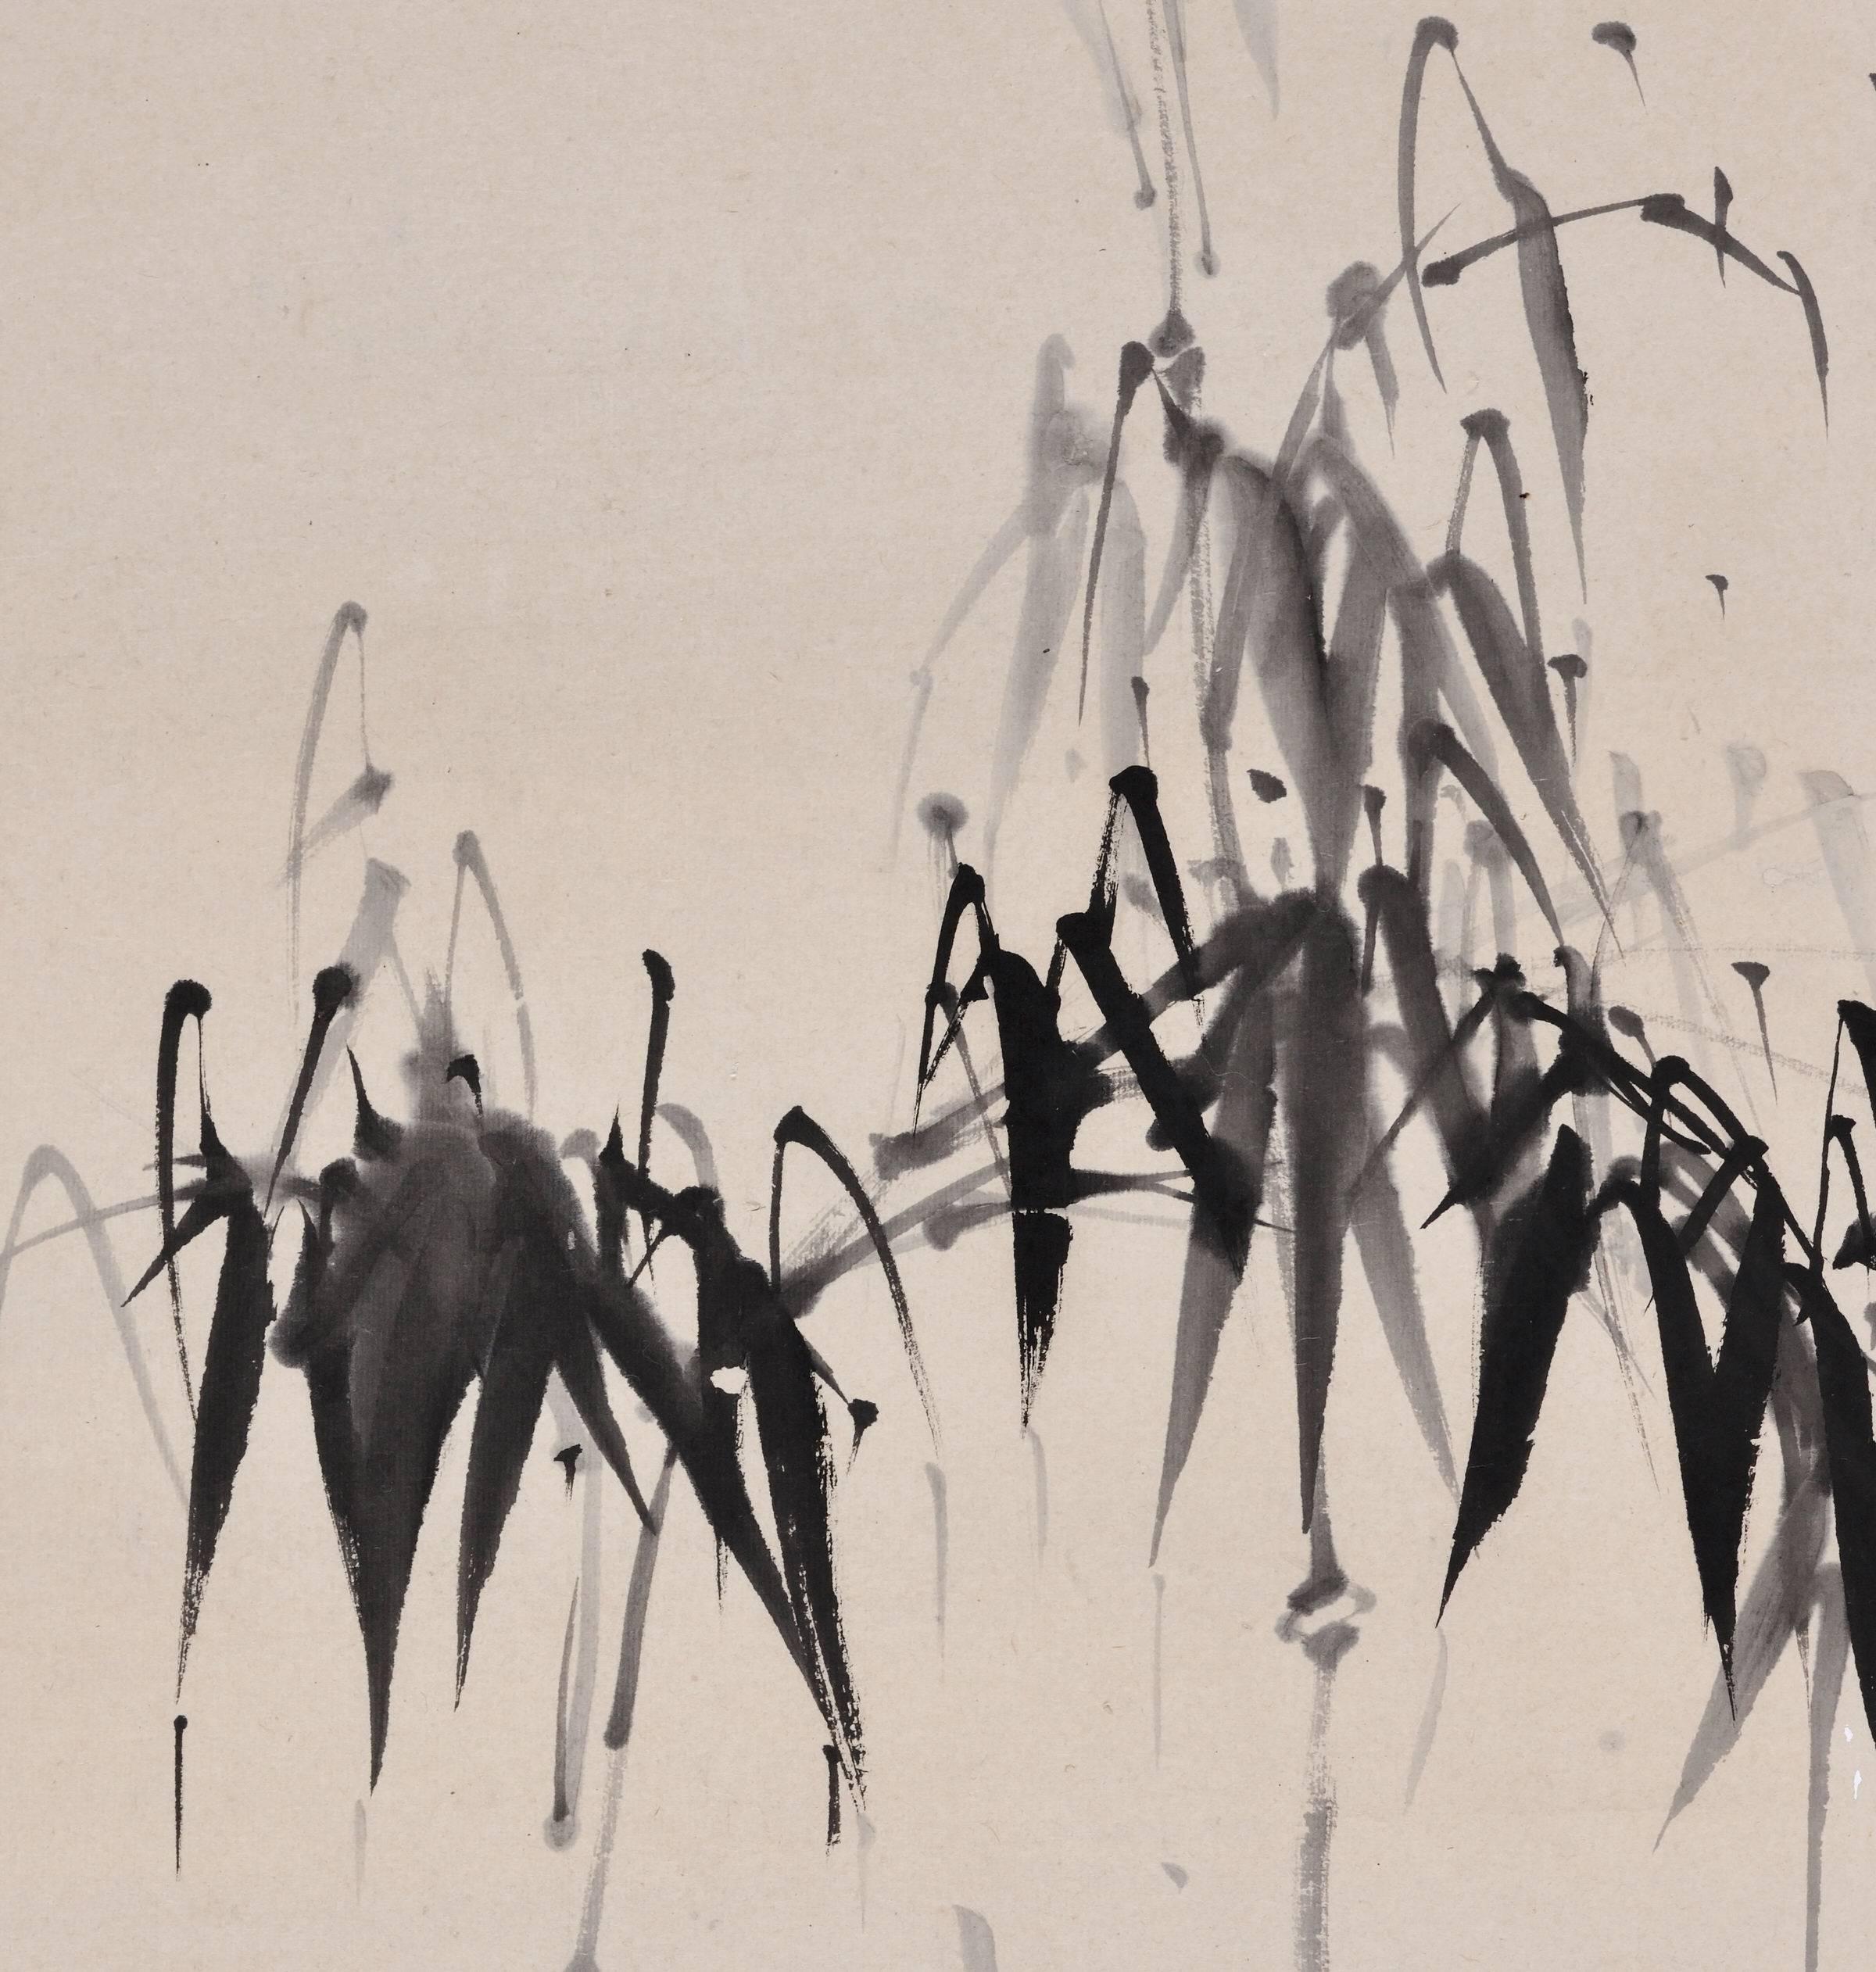 Cho Tosai (1713-1786)

“Bamboo”

Wall panel, ink on paper.

Upper Seal: Choyo 
Lower Seal: Sokushin-kyoshi

Dimensions:
129 cm x 39 cm x 2 cm (51” x 15.5” x .75”)

This bamboo painting by Cho Tosai demonstrates great mastery of brush and